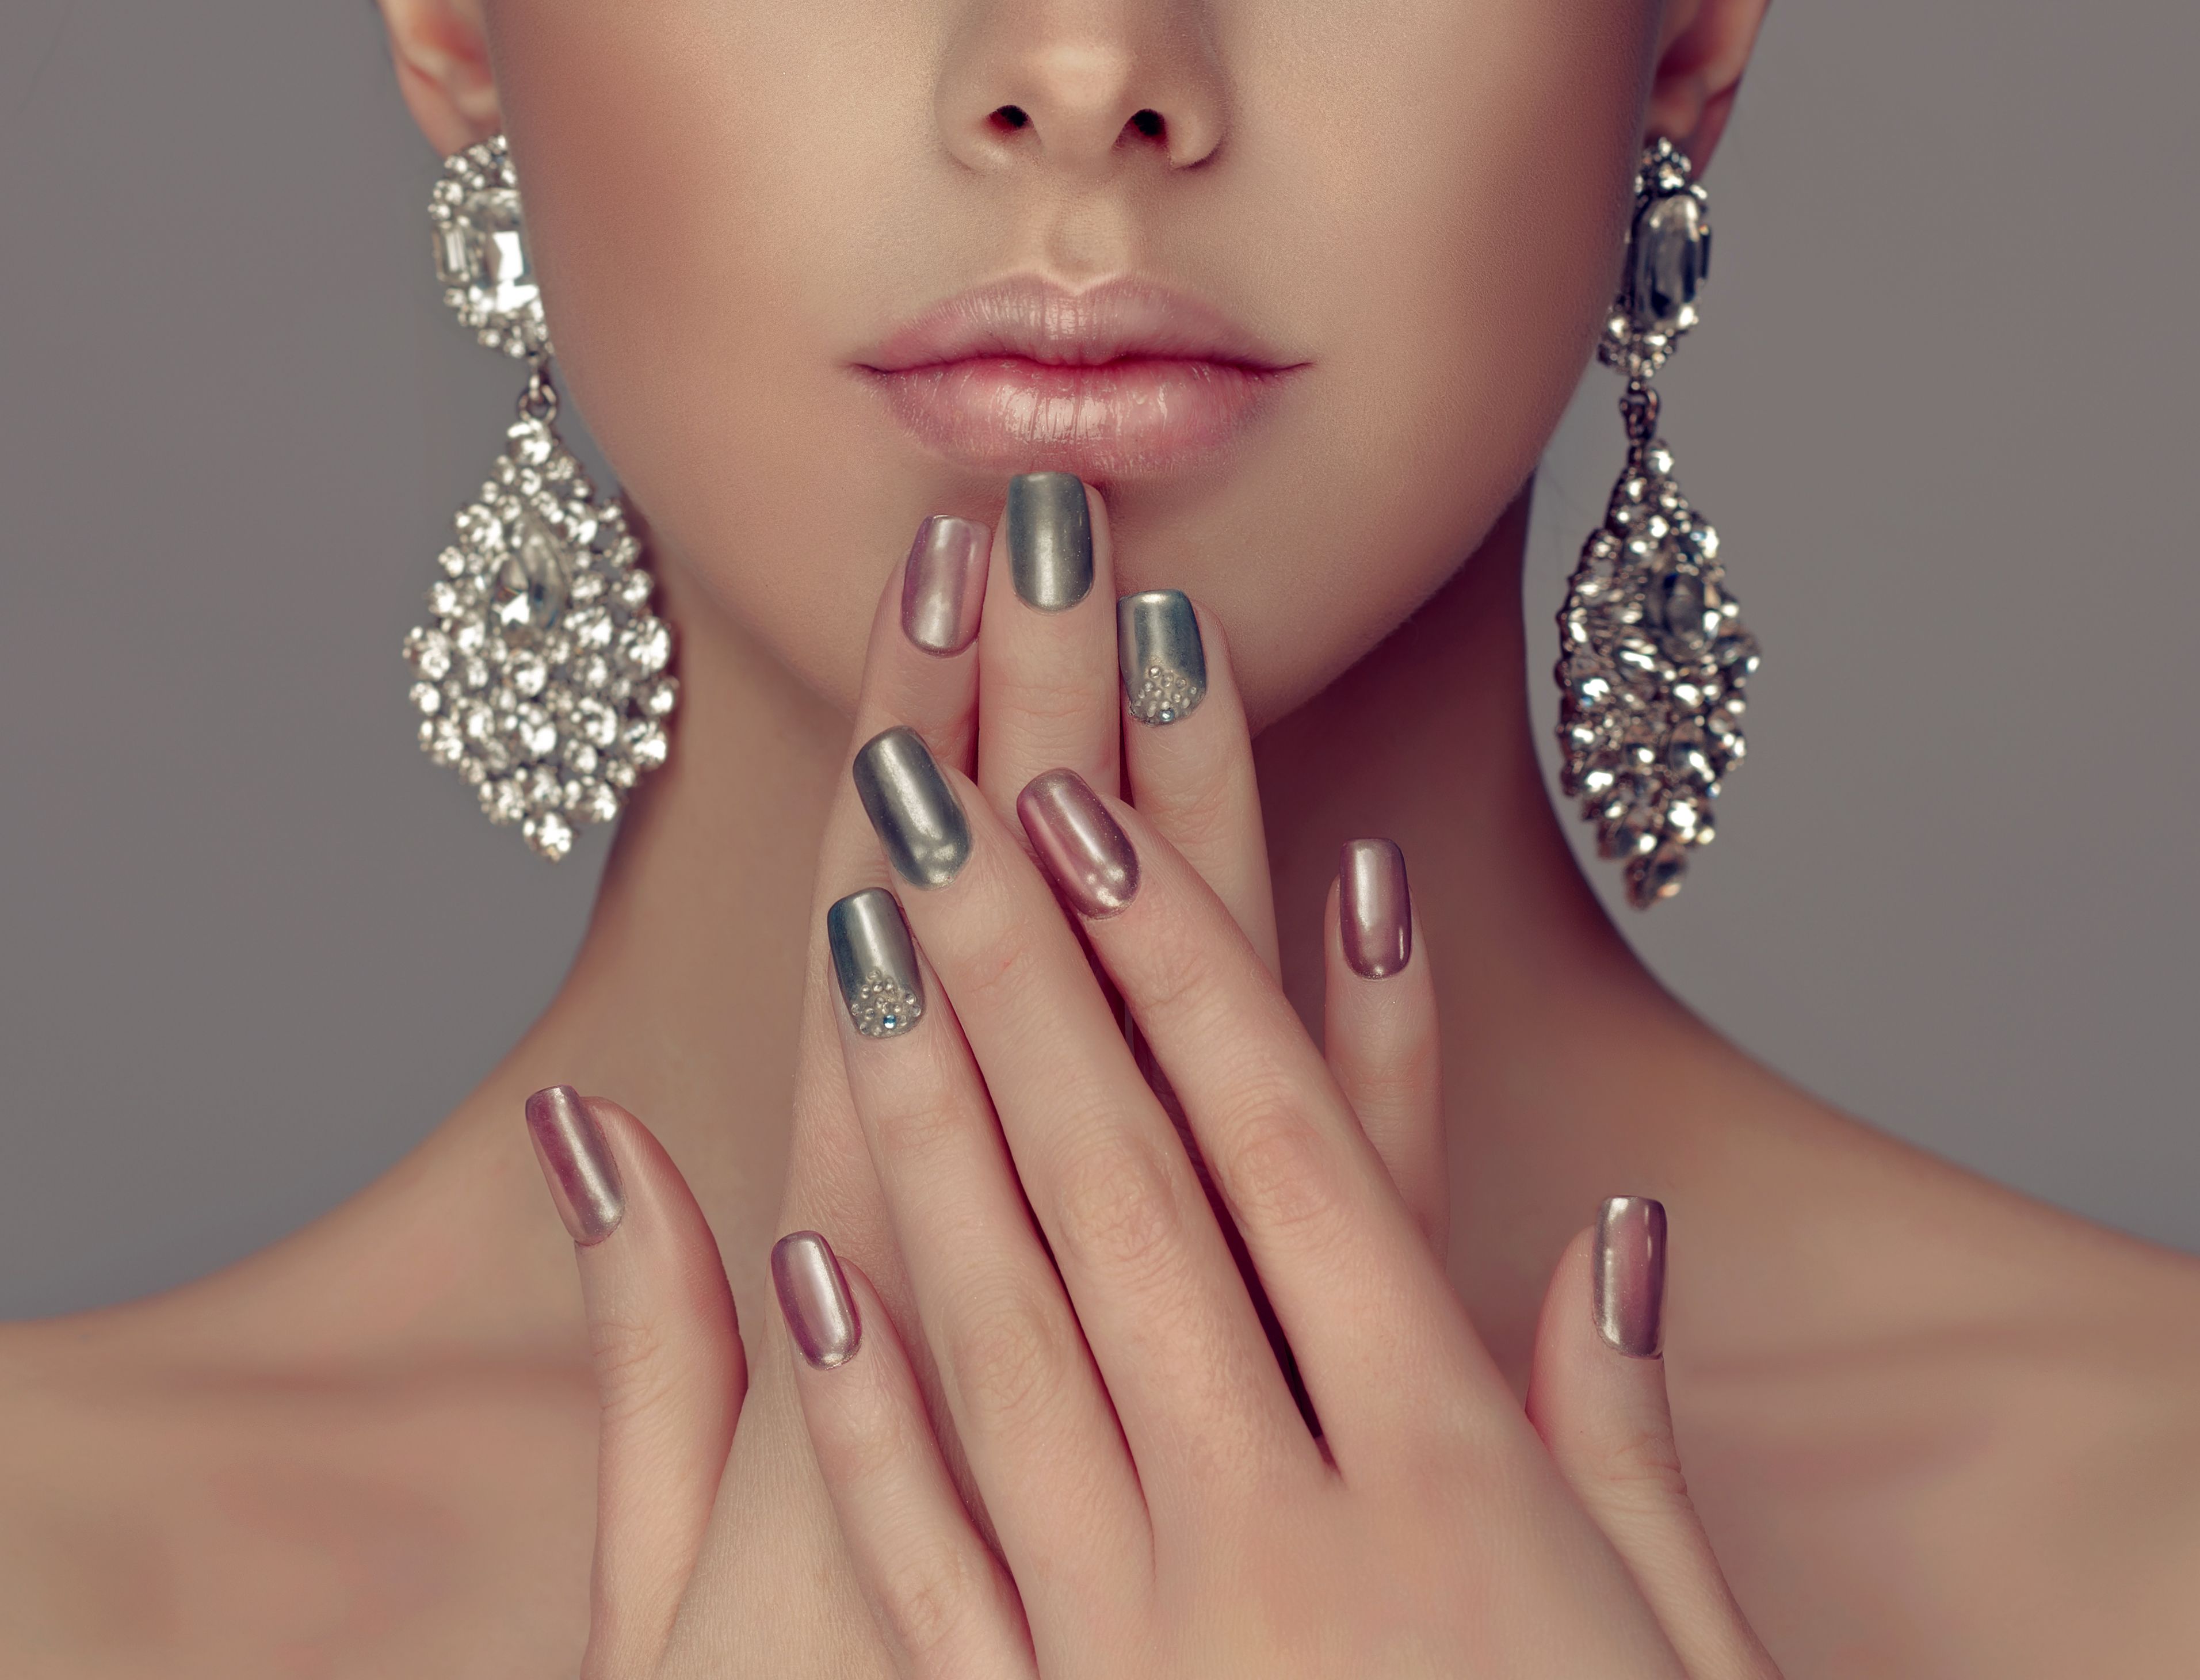 Green Nail Art Designs: Fresh and Stylish Ideas For Your Nails